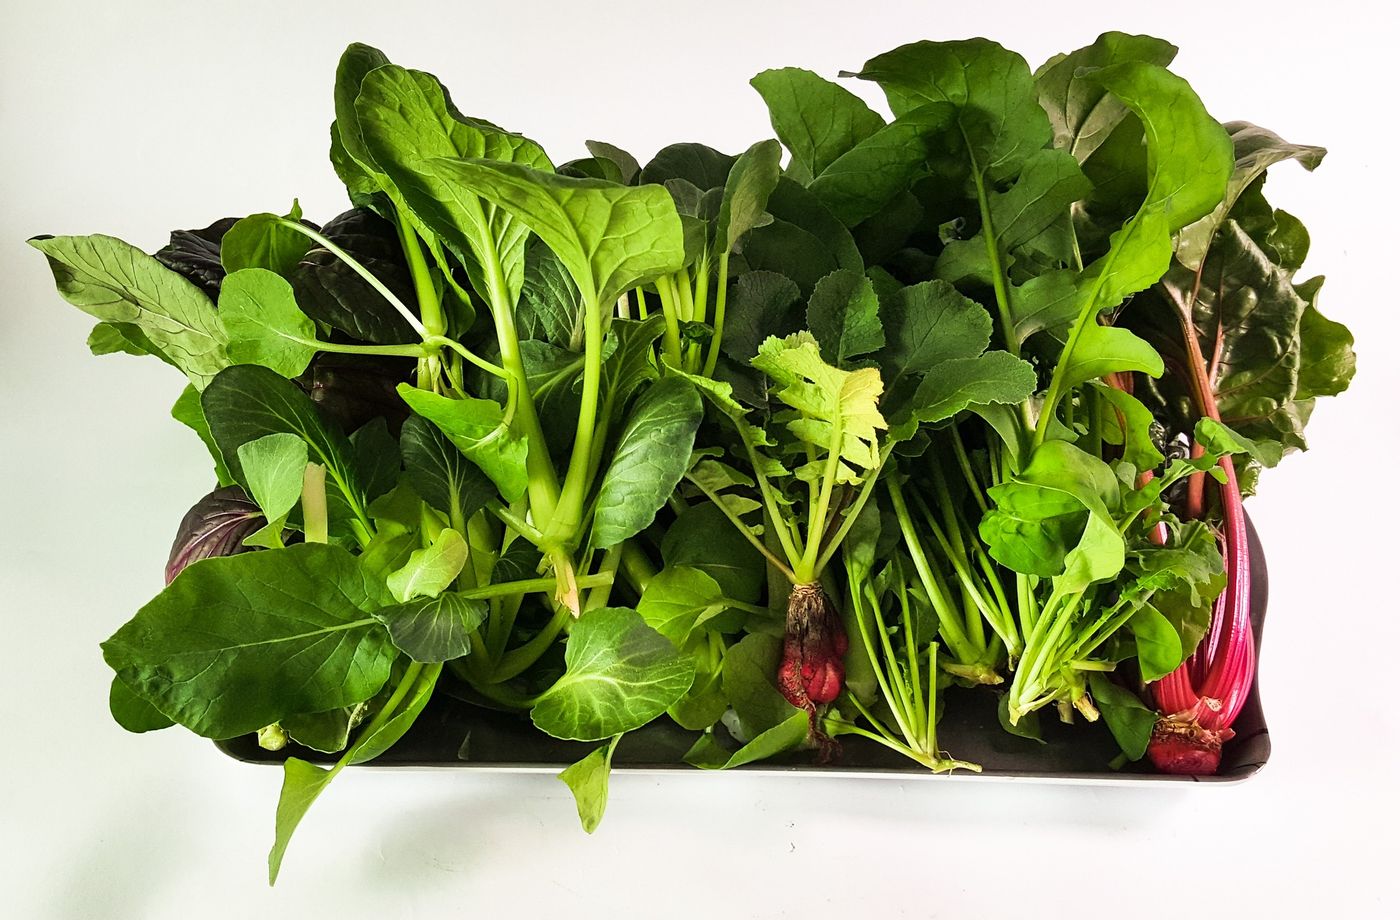 Grow Your Own Food With an Hydroponic Garden